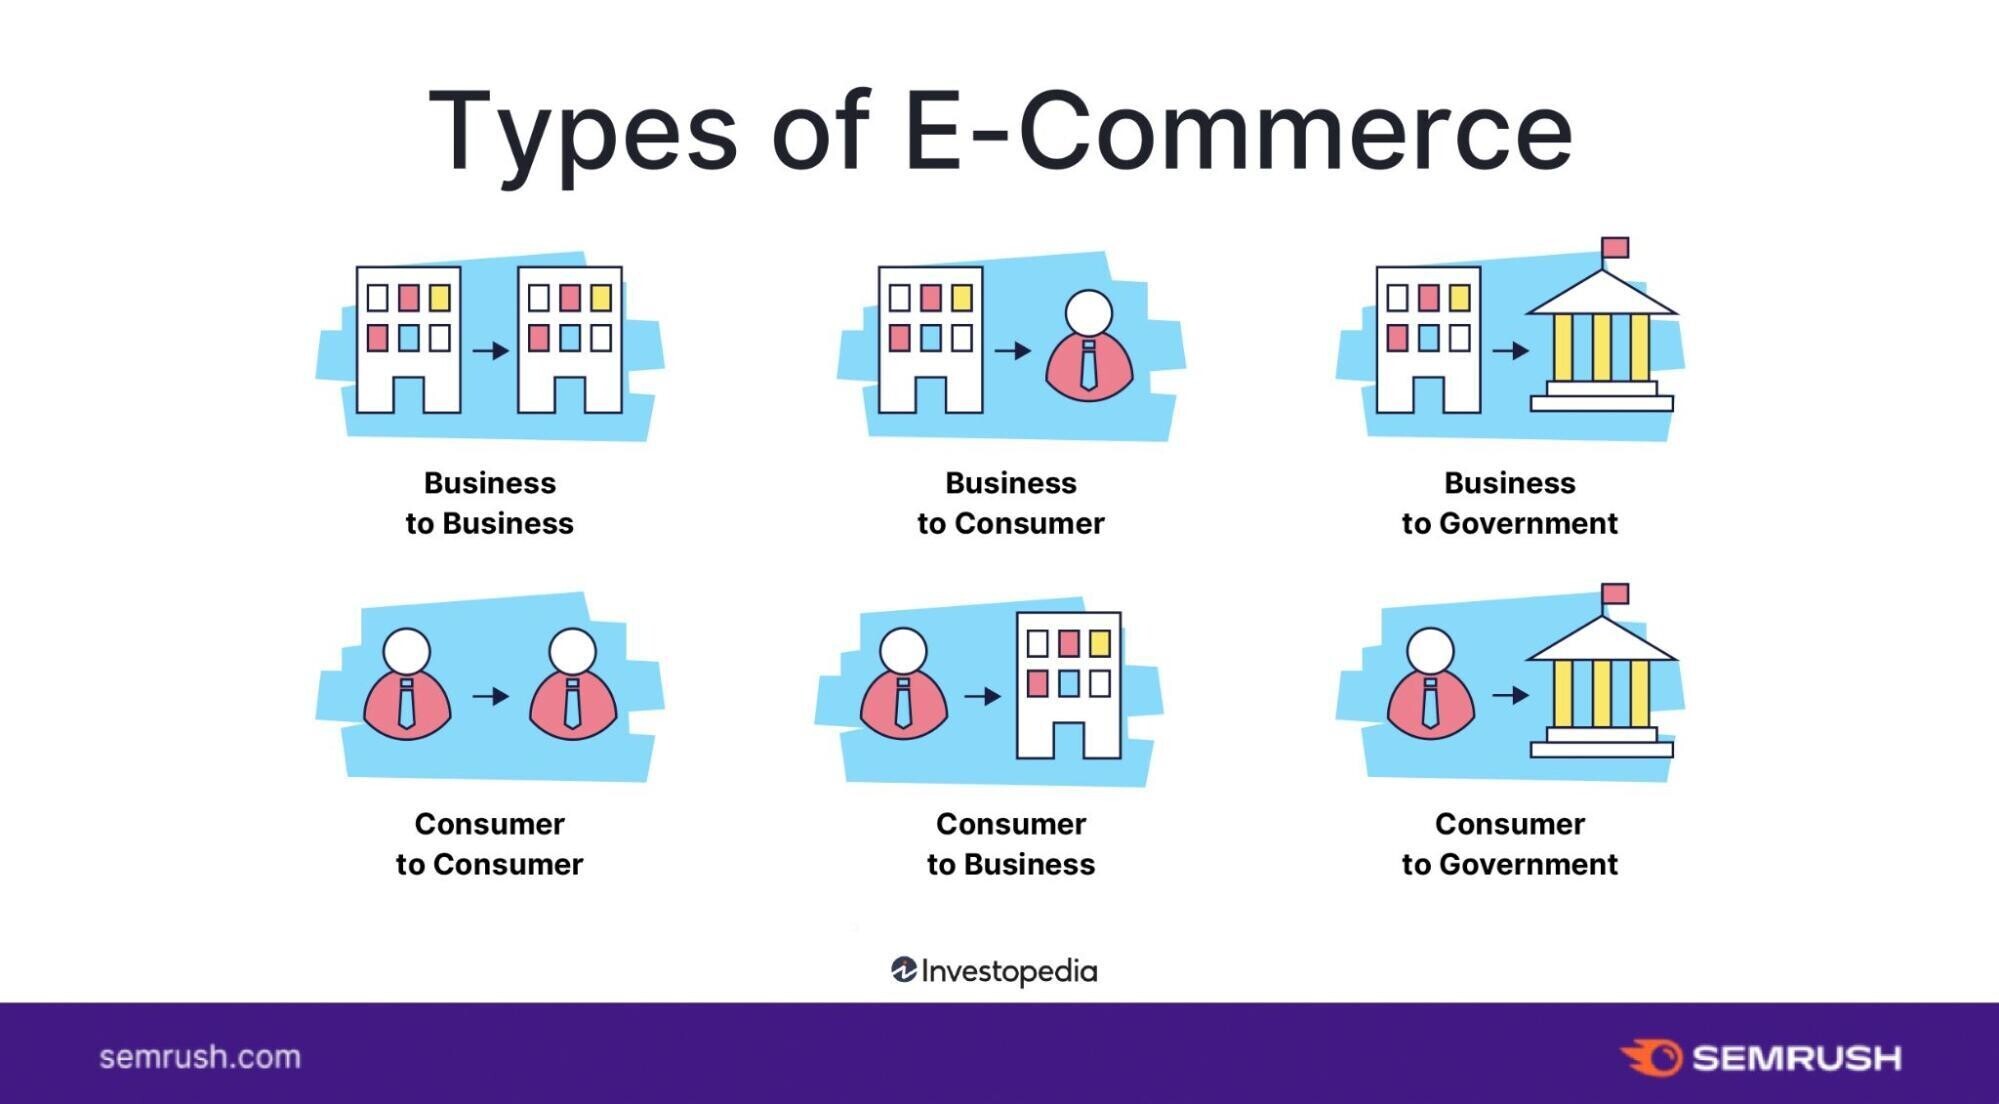 Types of ecommerce include Business to Business, Business to Consumer, Business to Gov, Consumer to Consumer, Consumer to Business, and Consumer to Gov